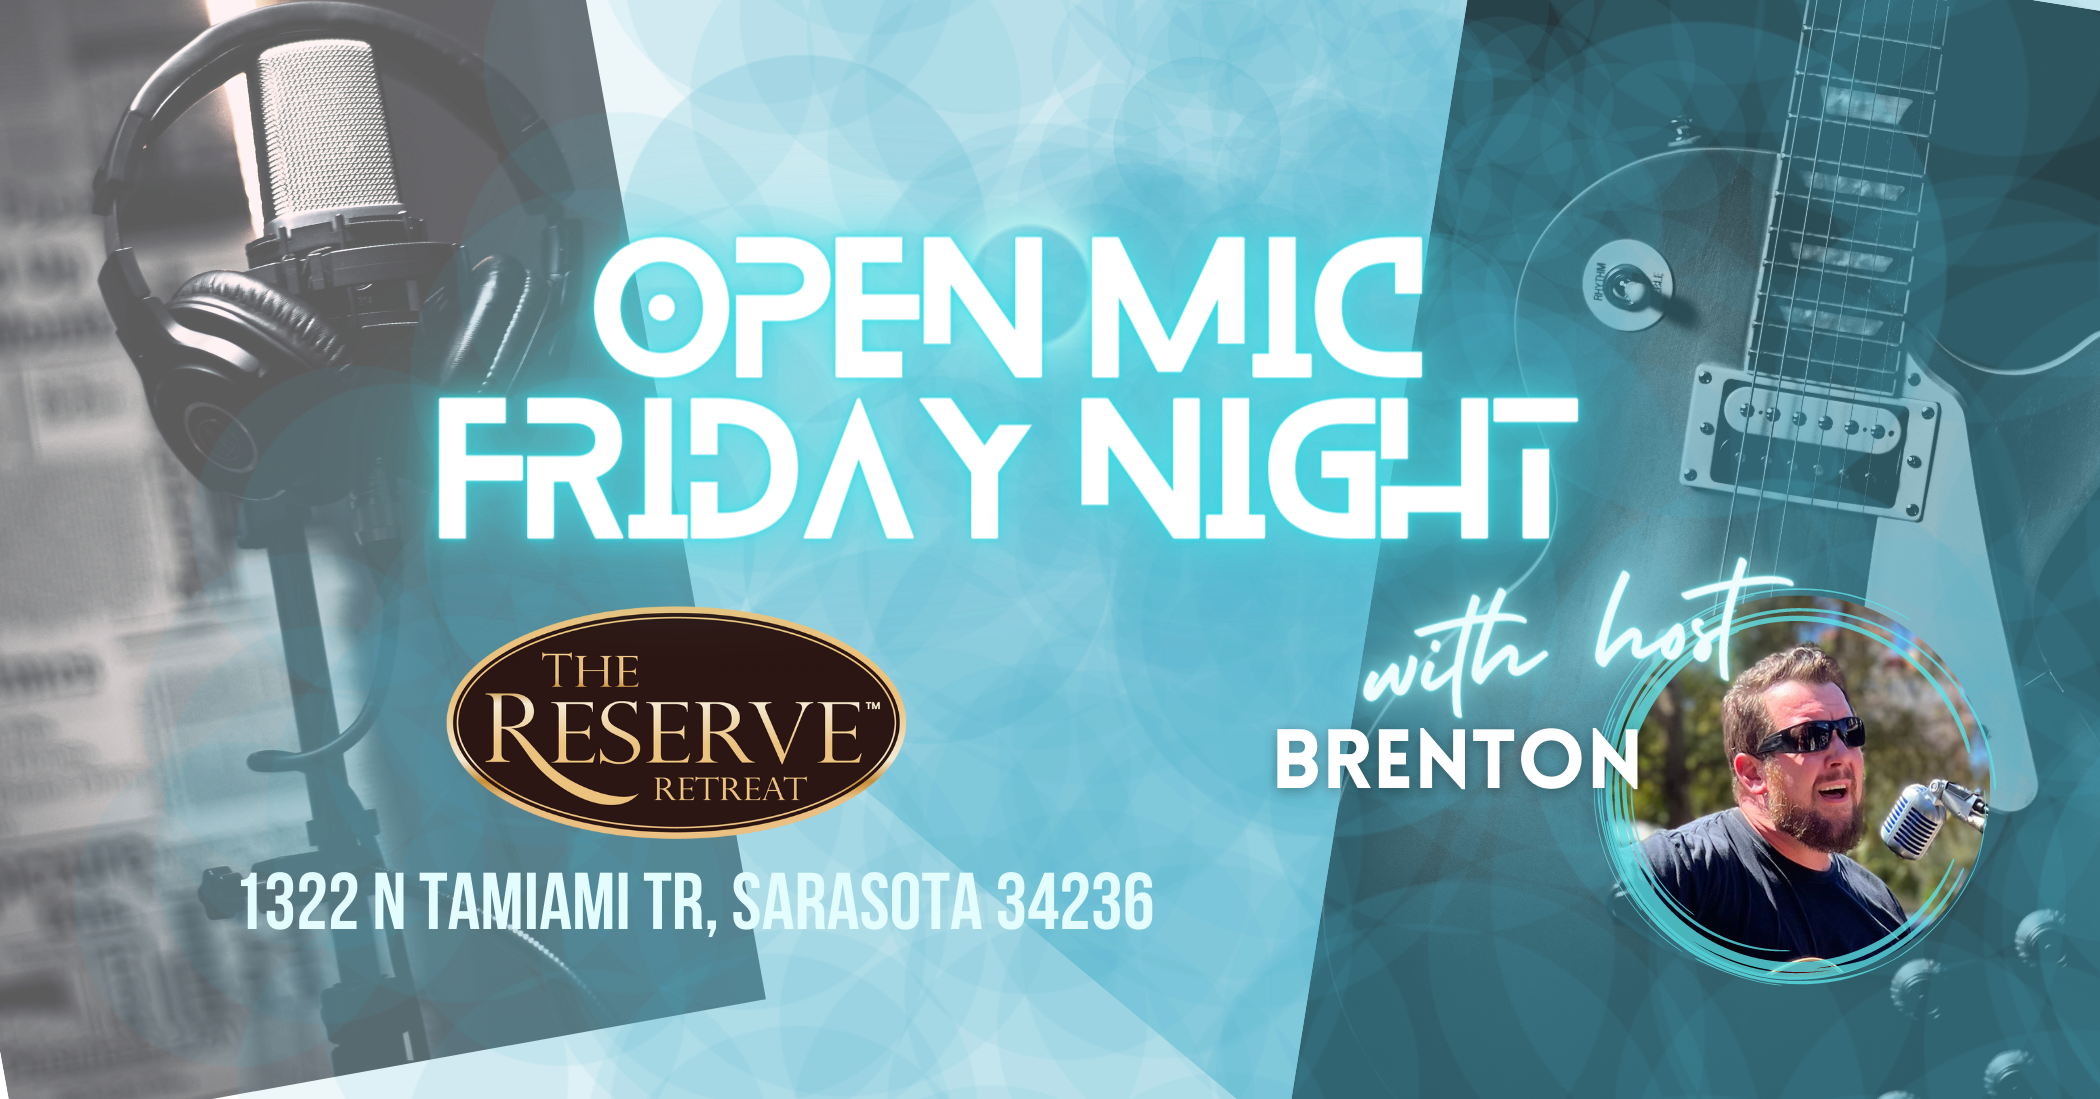 Friday night open mic with host brenton. 7:30-9:30pm at the reserve retreat in sarasota, fl